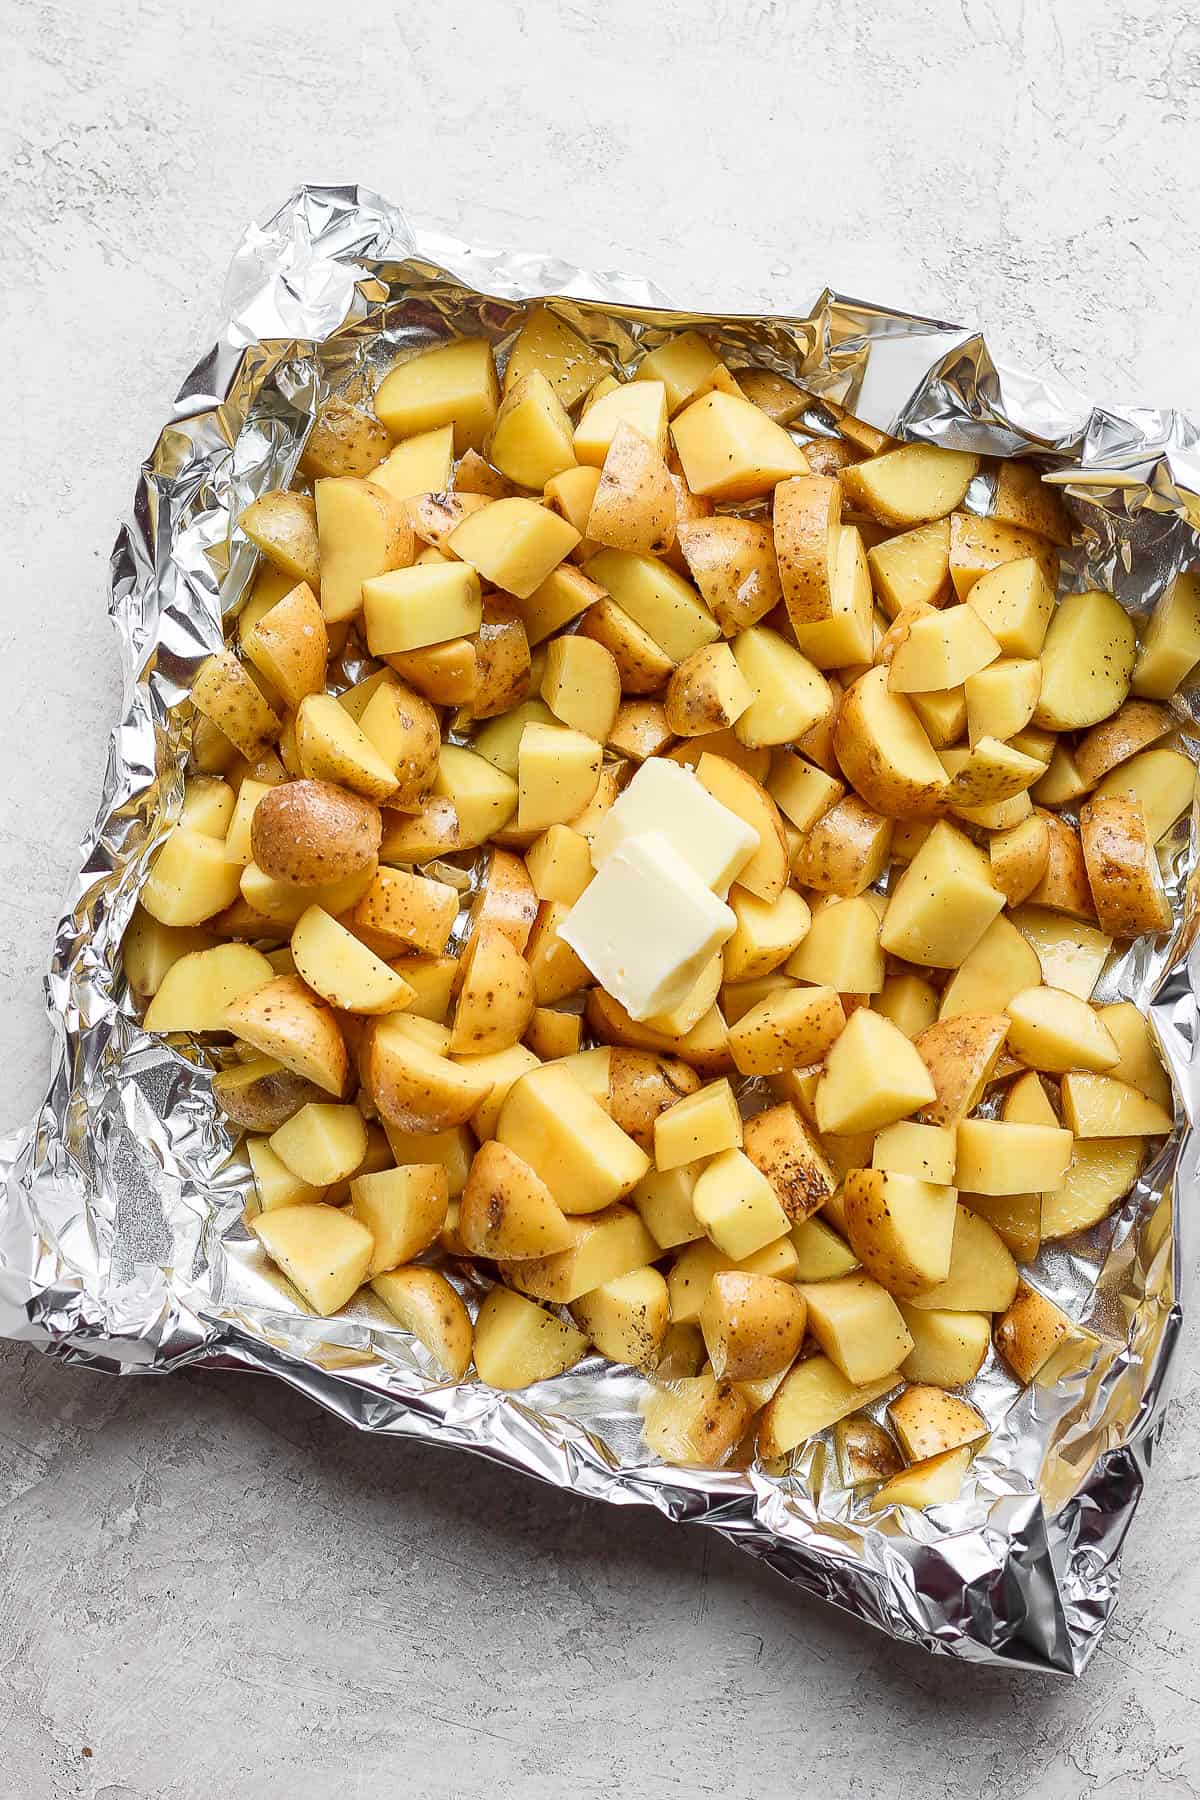 https://thewoodenskillet.com/wp-content/uploads/2021/07/grilled-potatoes-in-foil-recipe-6.jpg